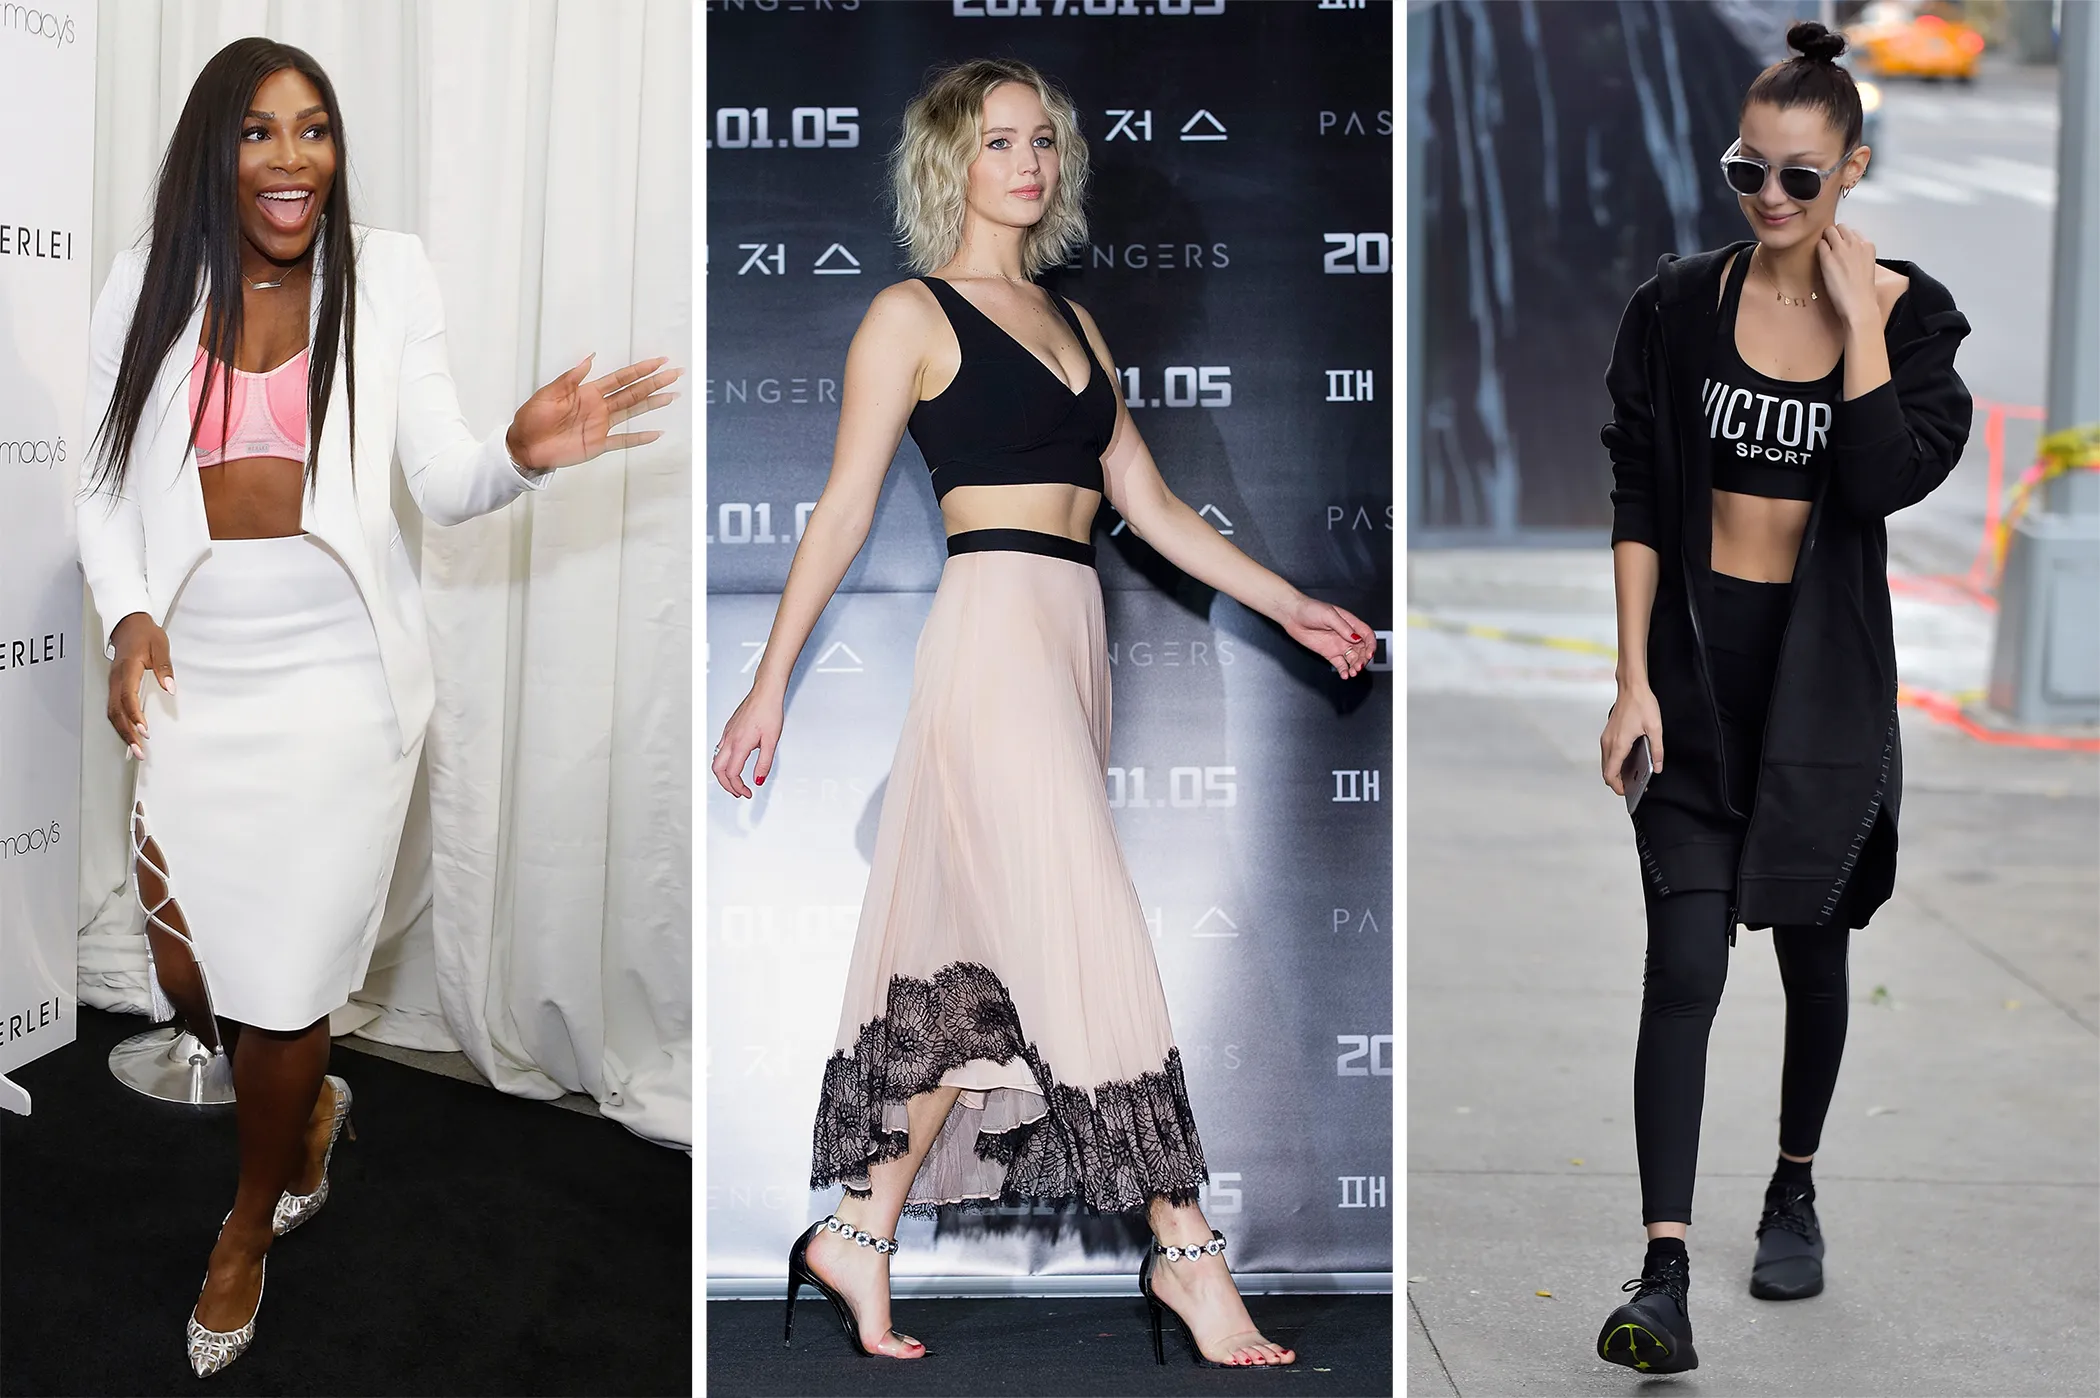 Street Style Stars Wearing Sports Bras To Fashion Shows In Paris